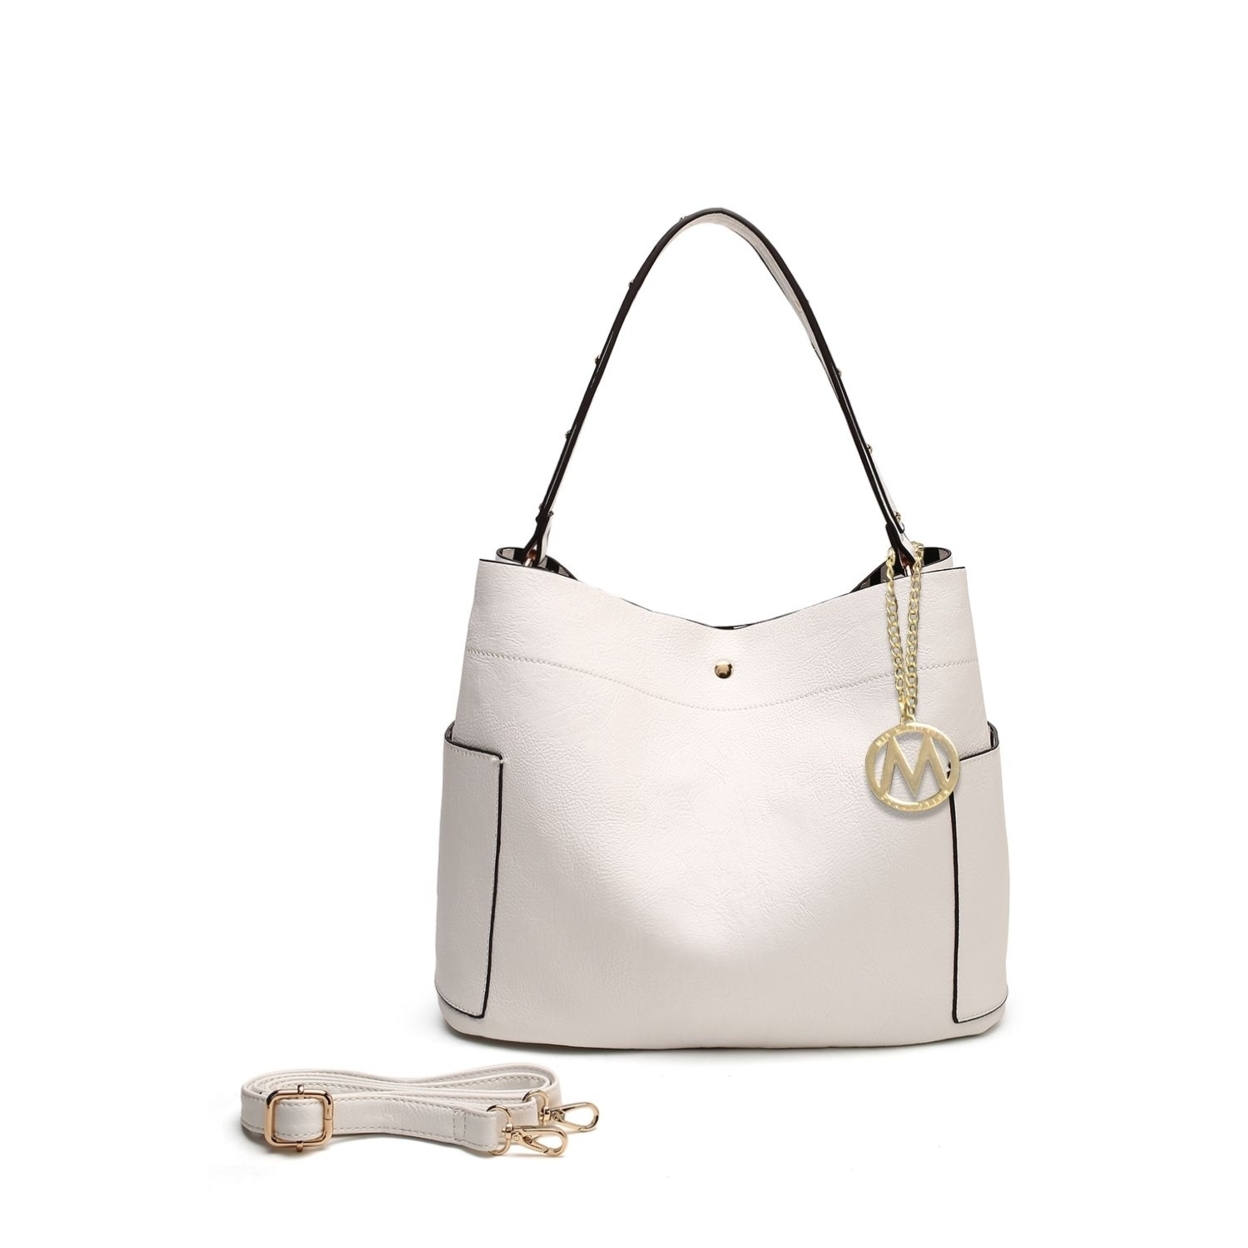 MKF Collection Sarahi 2 In 1 Fashion Hobo Handbag With Cross Body Pouch By Mia K. - White